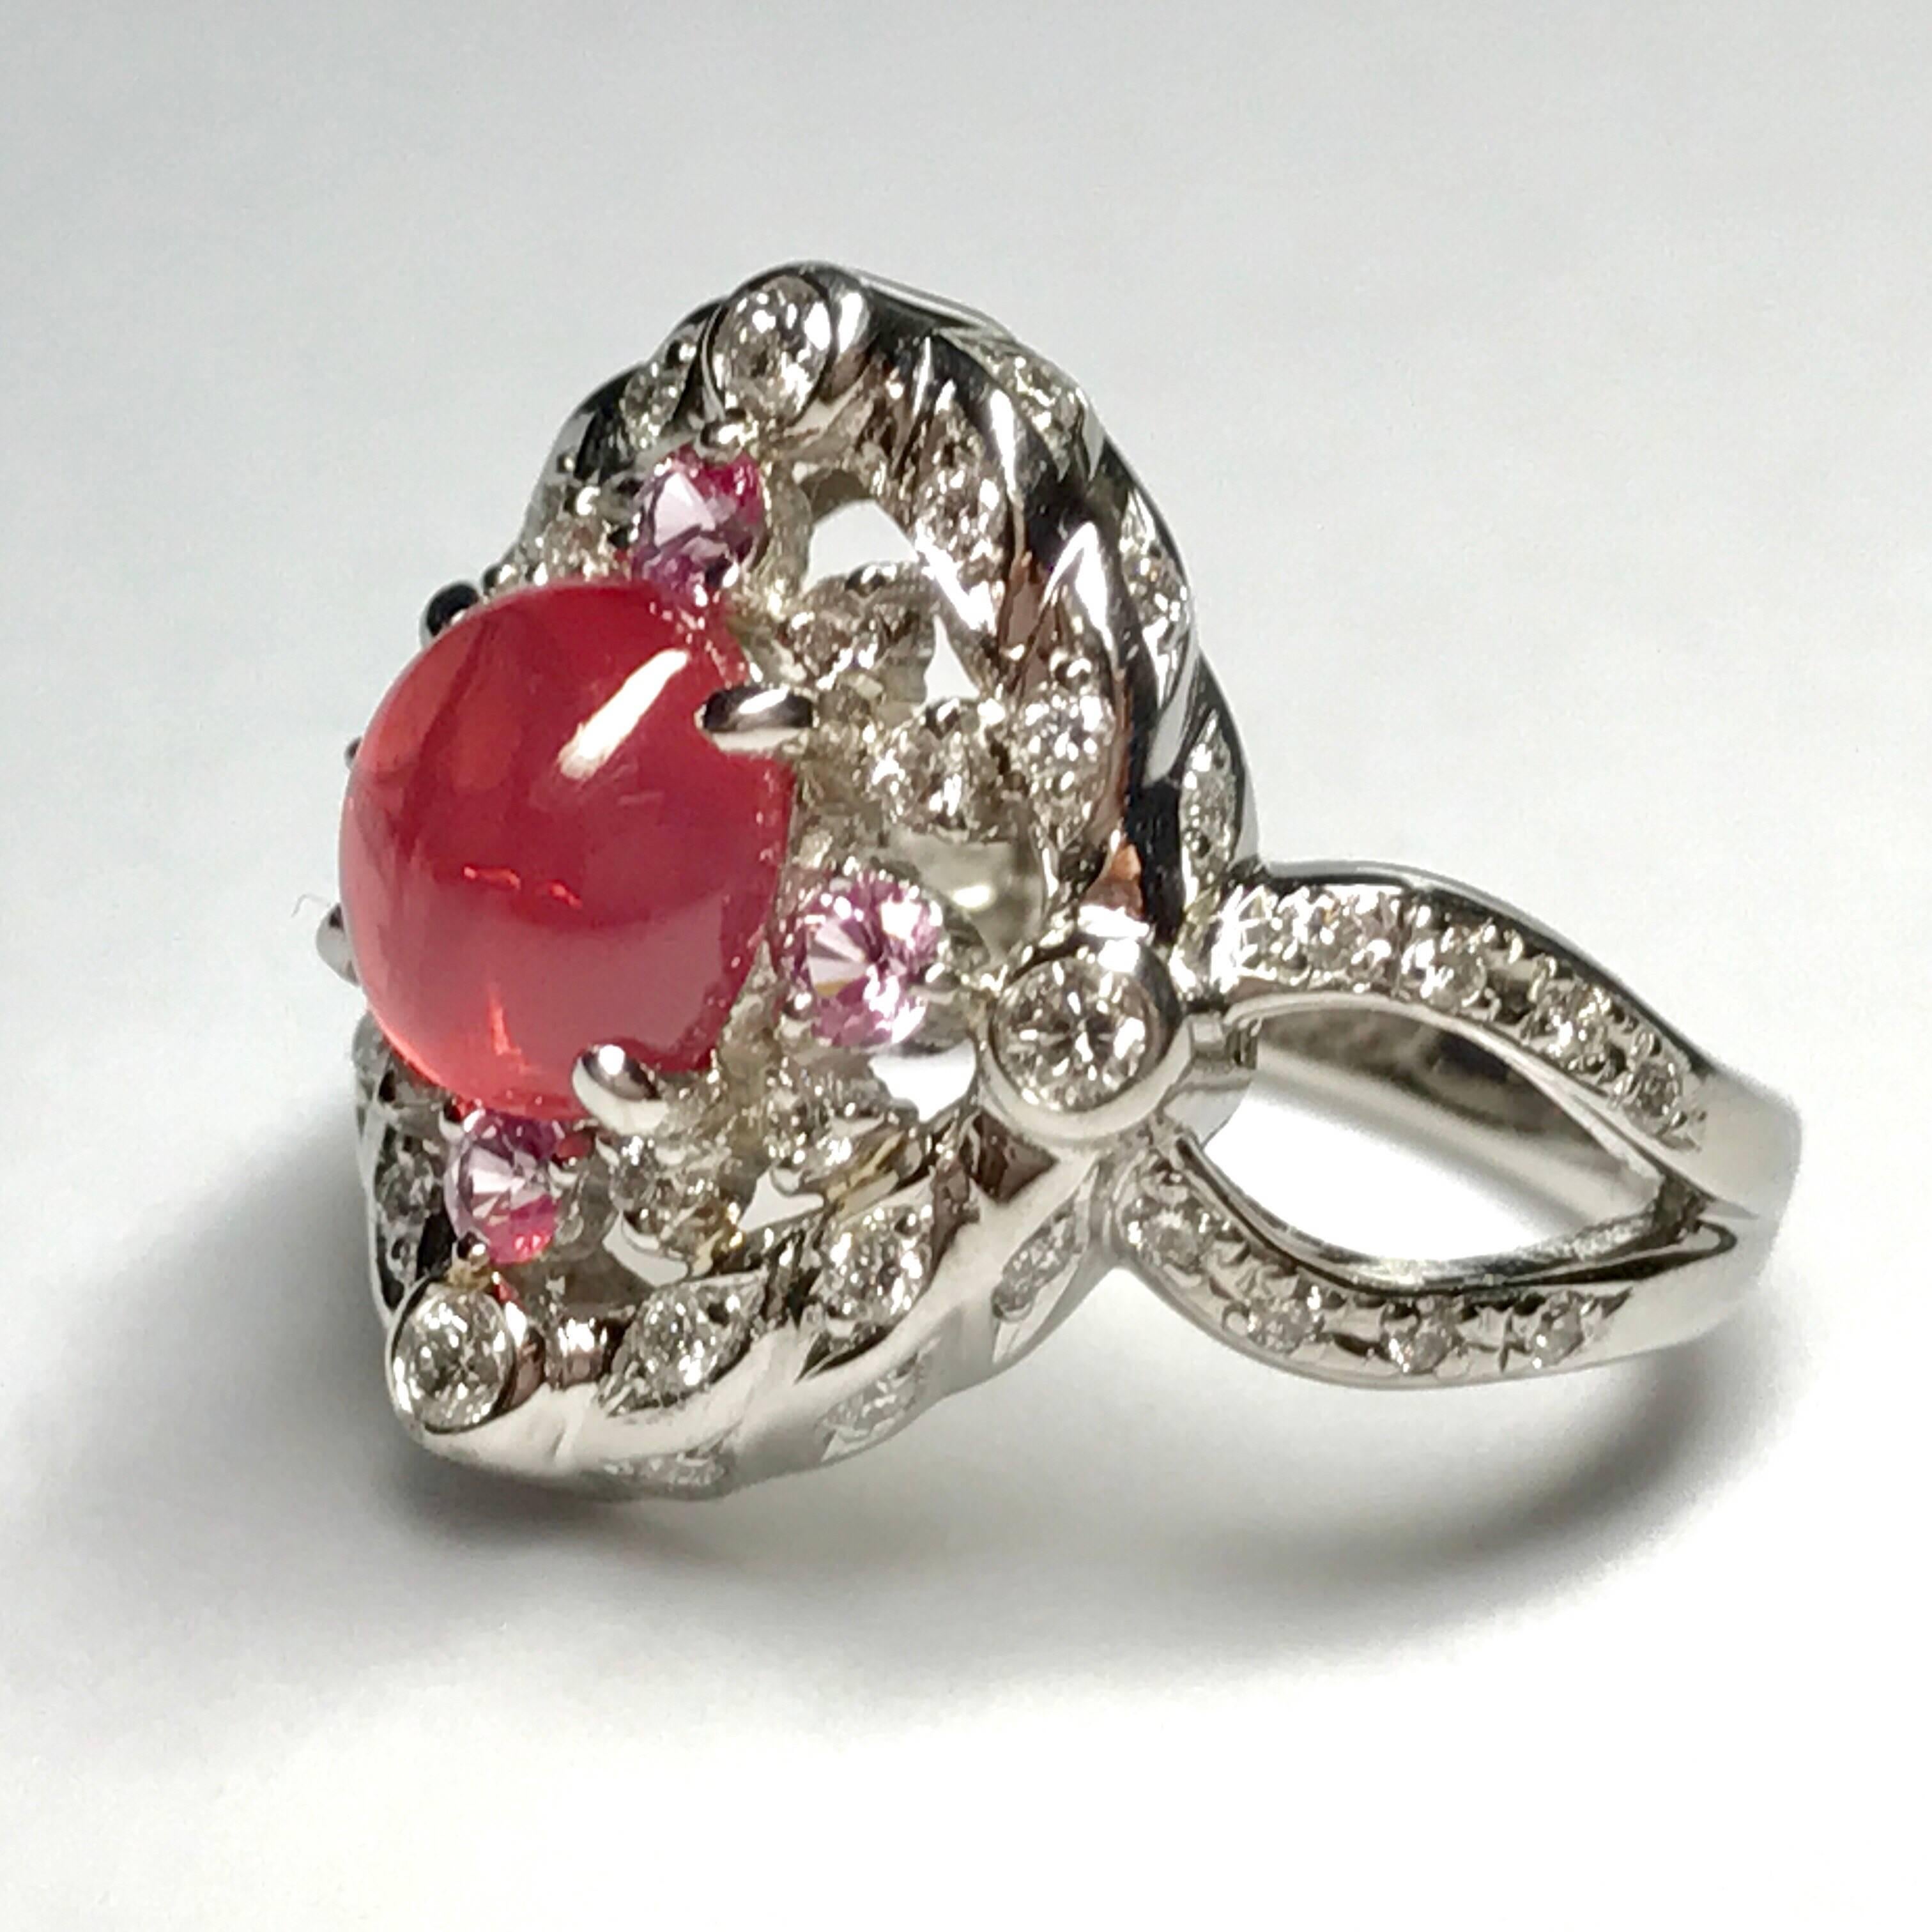 All buyers outside of Japan will receive -10% tax exemption from the list price. 
Please inquire for details.
Spinel : 2.43ct / Sapphires : 0.26ct / Diamonds : 0.51ct
Approximate Size of the center stone : L7.7mm W7mm D4mm
Size : JP 13.5 / US7 / EU